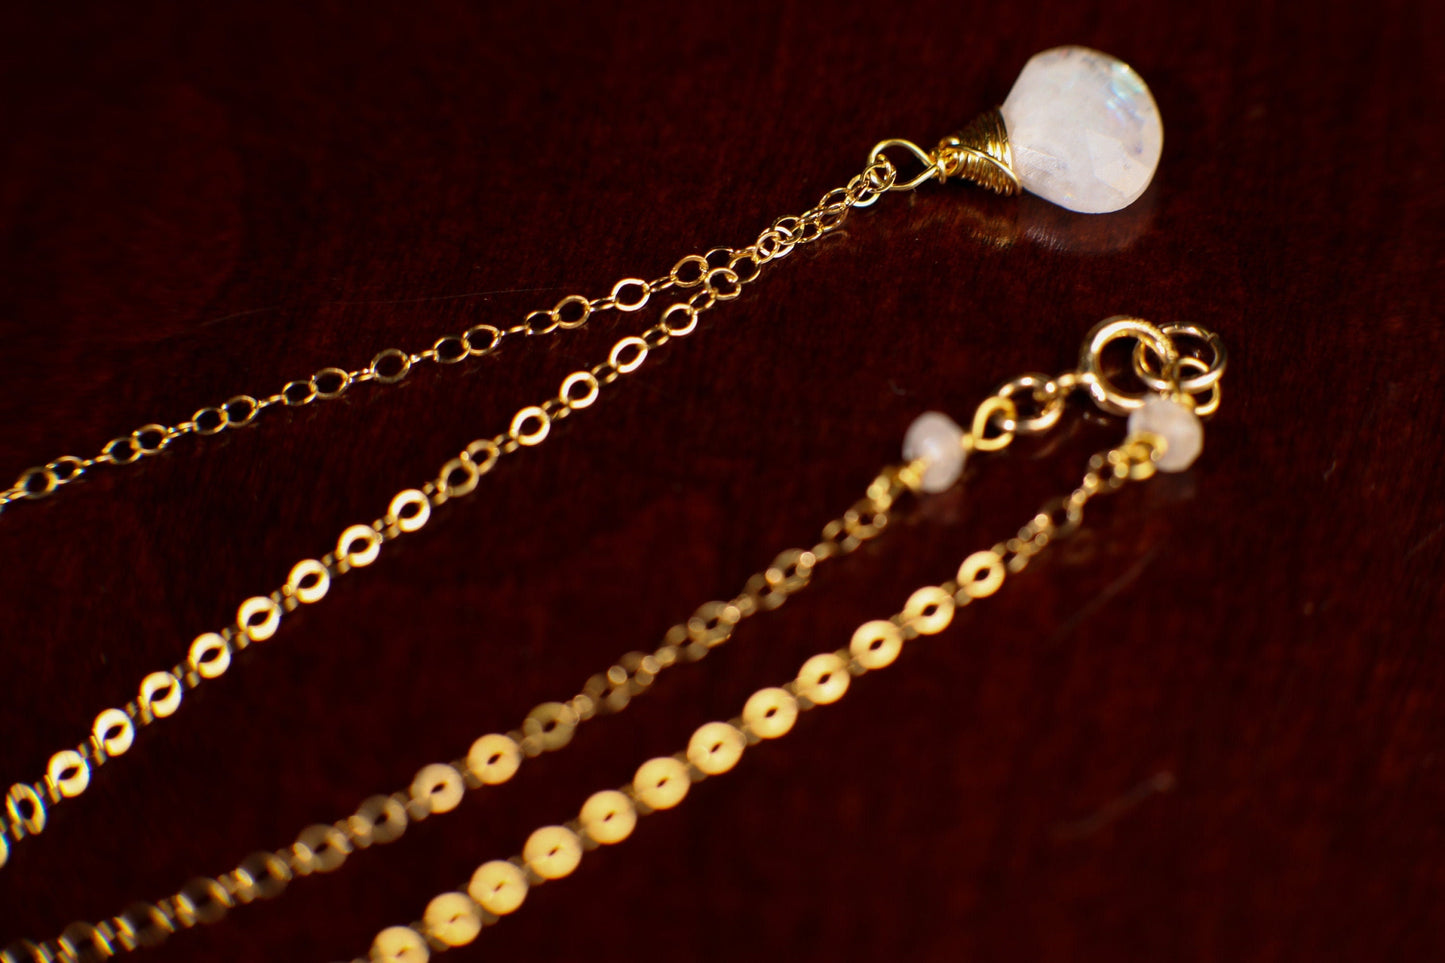 Rainbow Moonstone Faceted Heart Briolette Teardrop Wire Wrapped AAA Quality Cut Gems in 14K Gold Filled Necklace